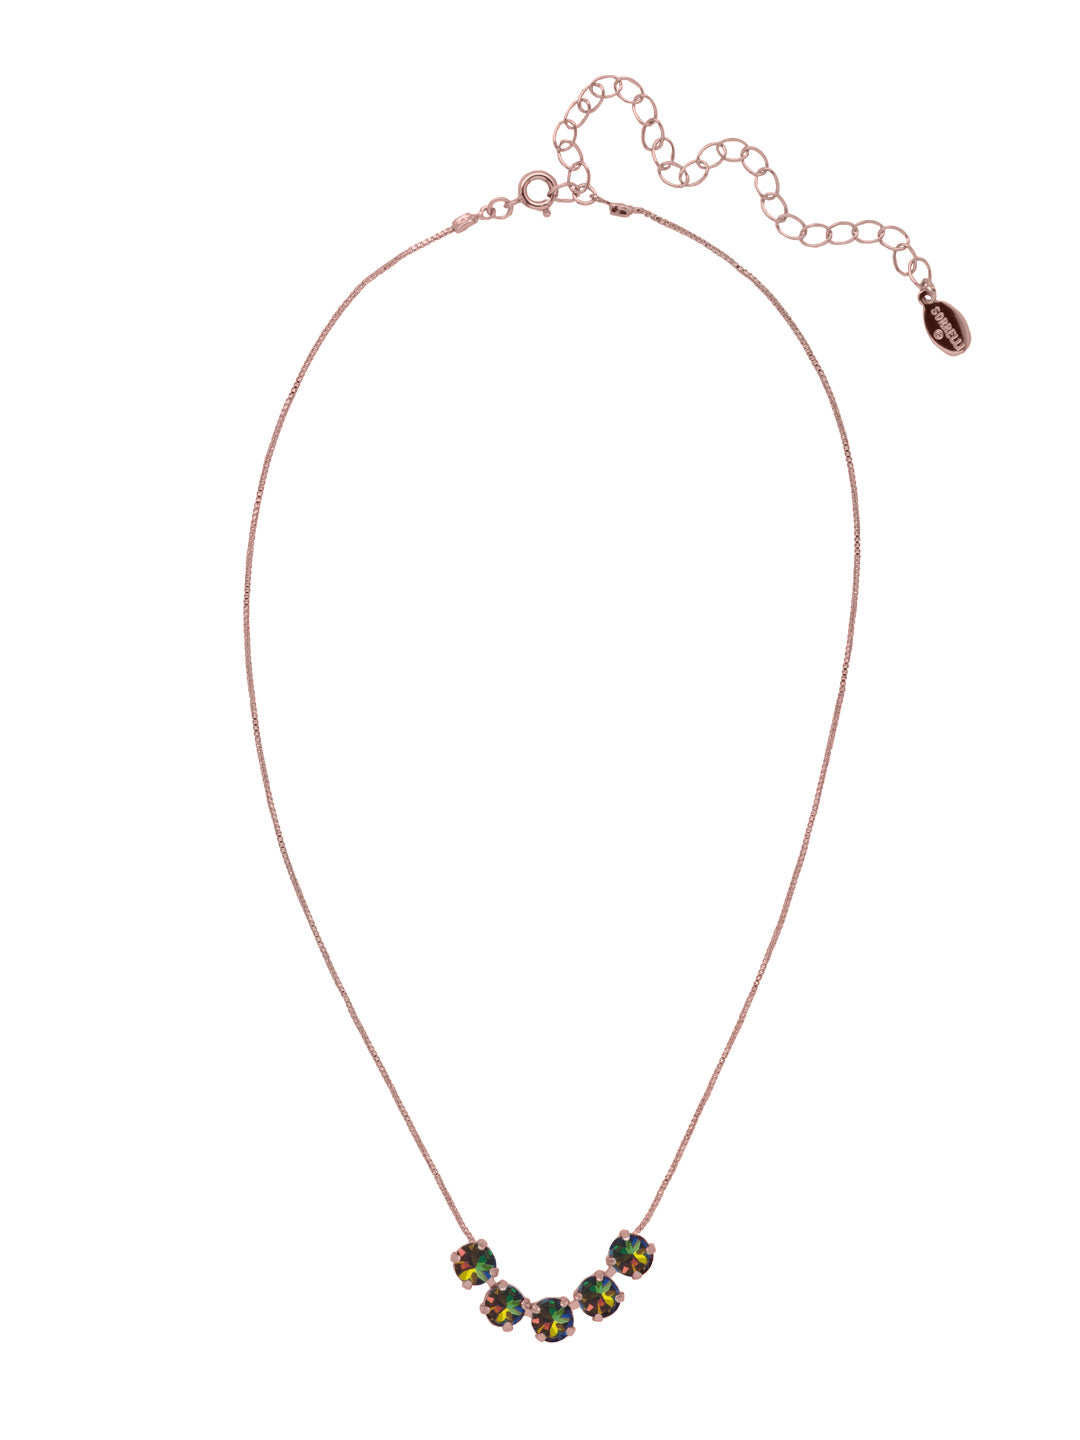 Shaughna Tennis Necklace - NFC84RGVO - <p>The Shaughna Tennis Necklace features five crystals on a delicate adjustable chain. From Sorrelli's Volcano collection in our Rose Gold-tone finish.</p>